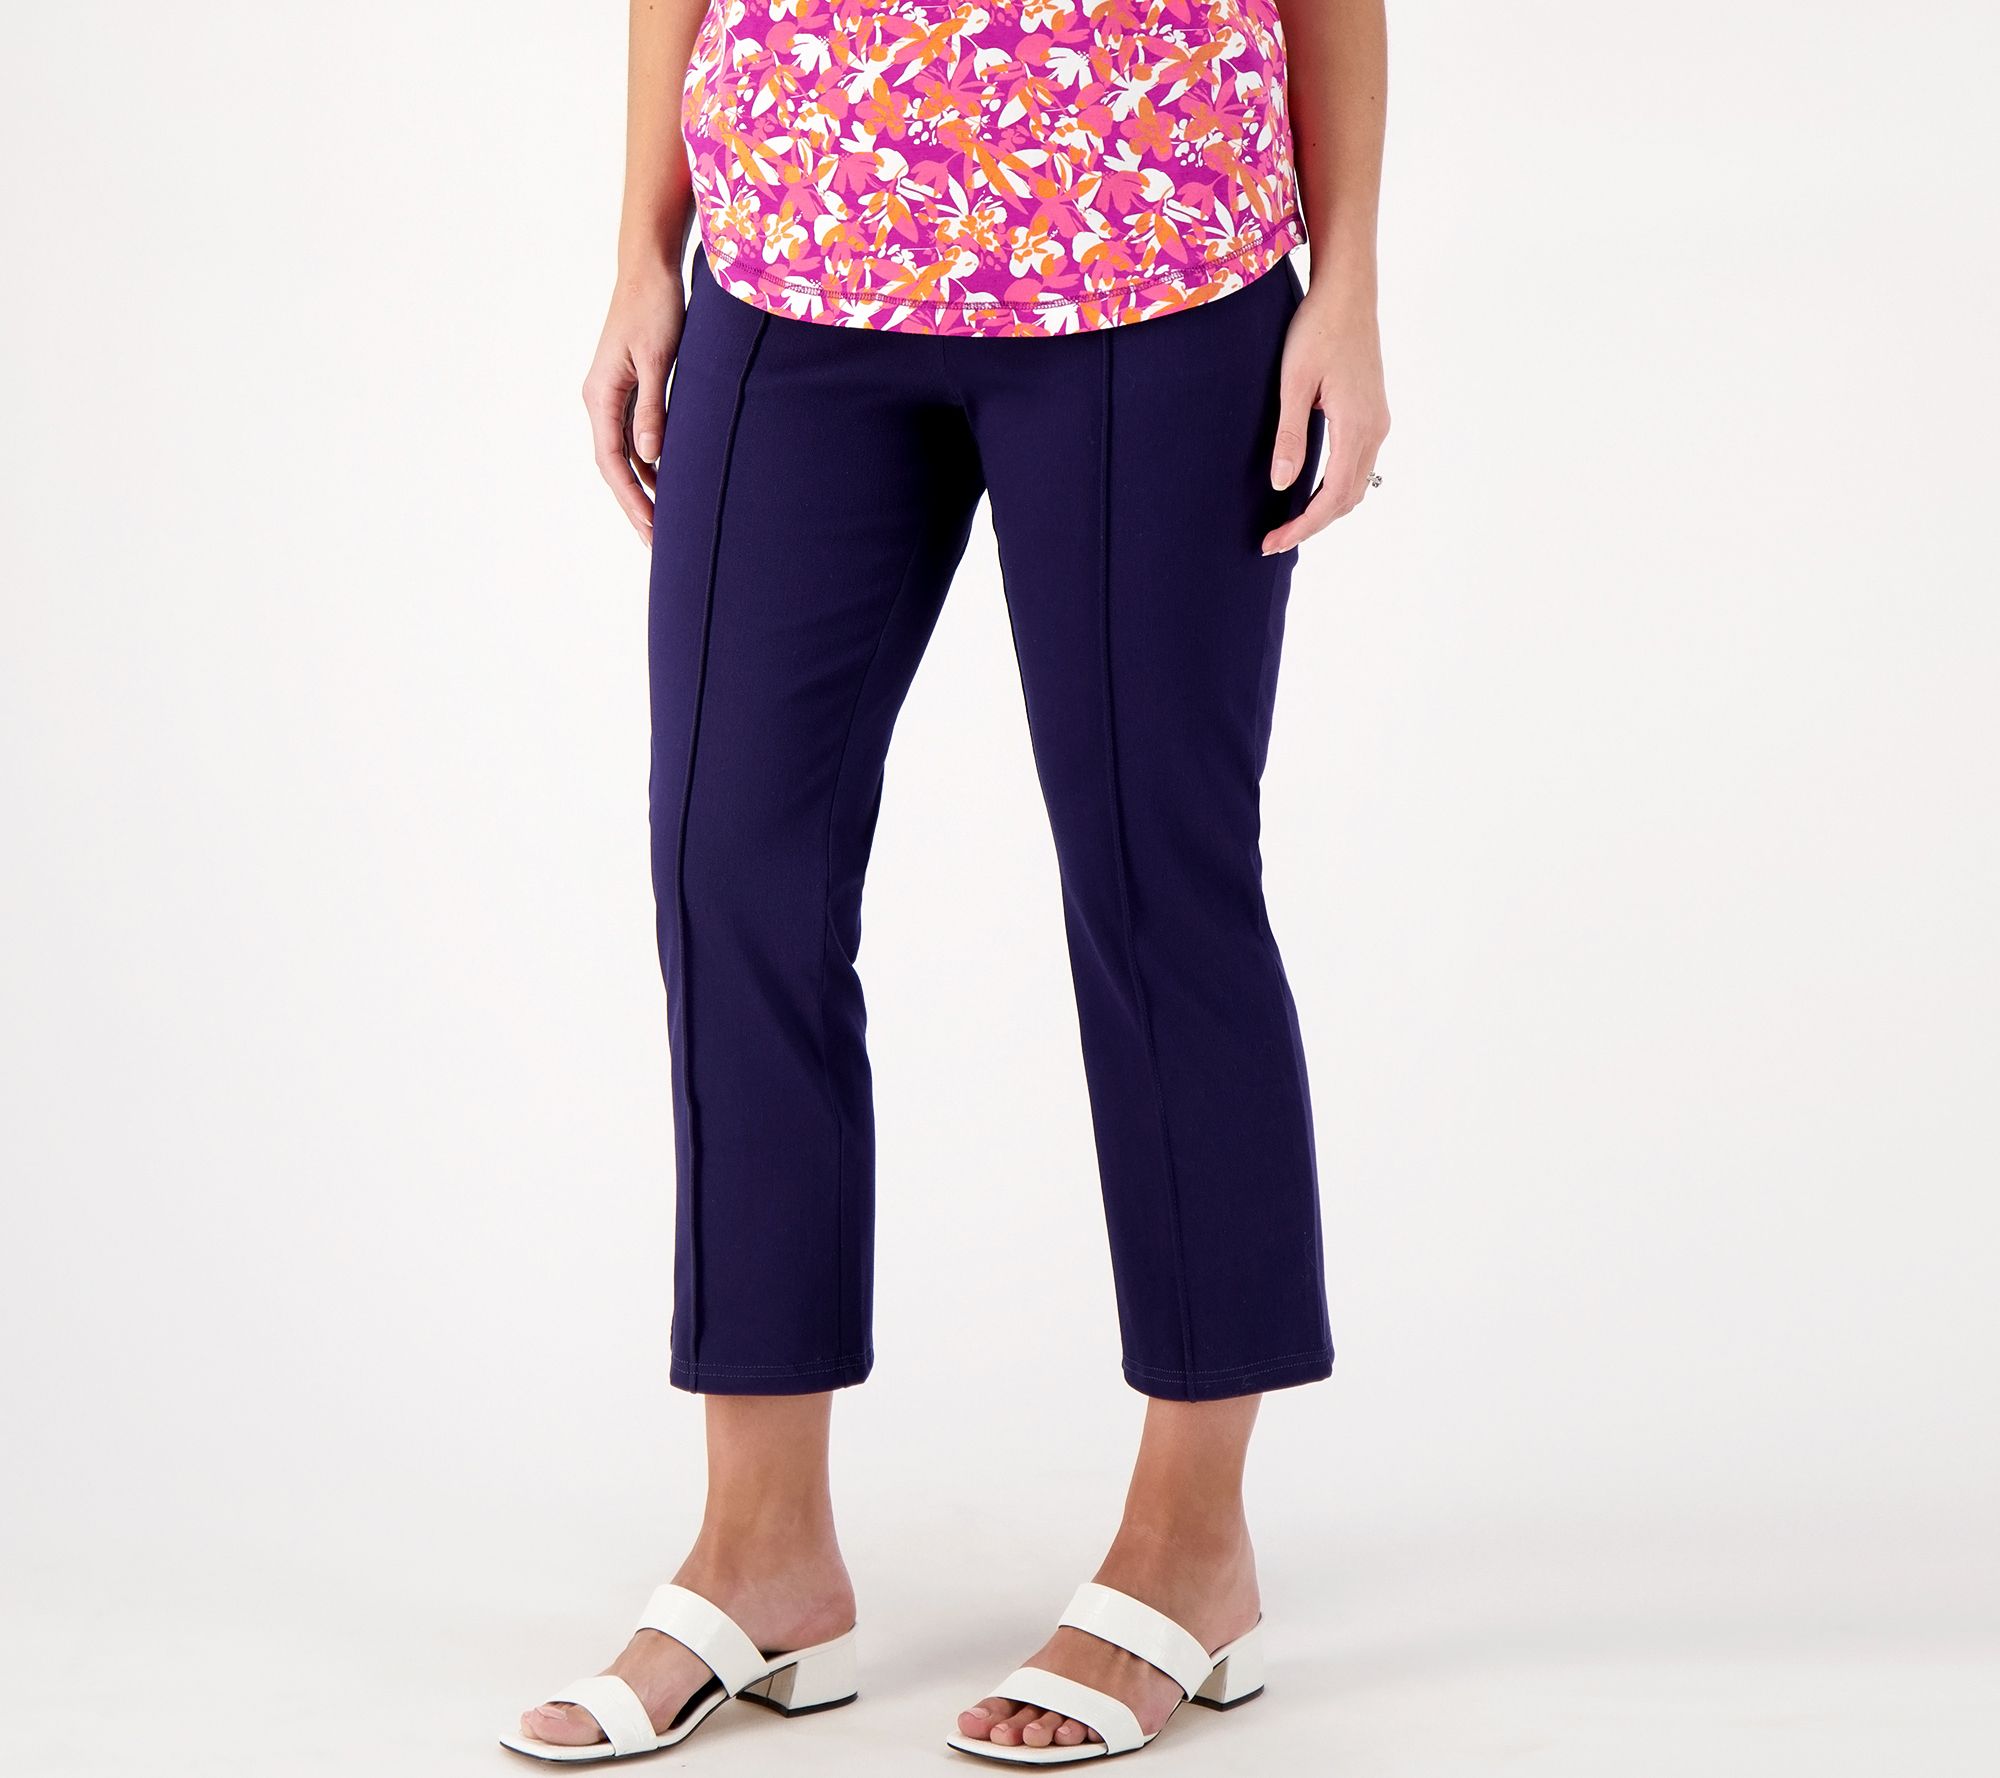 QVC) Denim & Co. Comfy Knit Air RegularStraight Crop Pant with Side Slits –  TVShoppingQueens